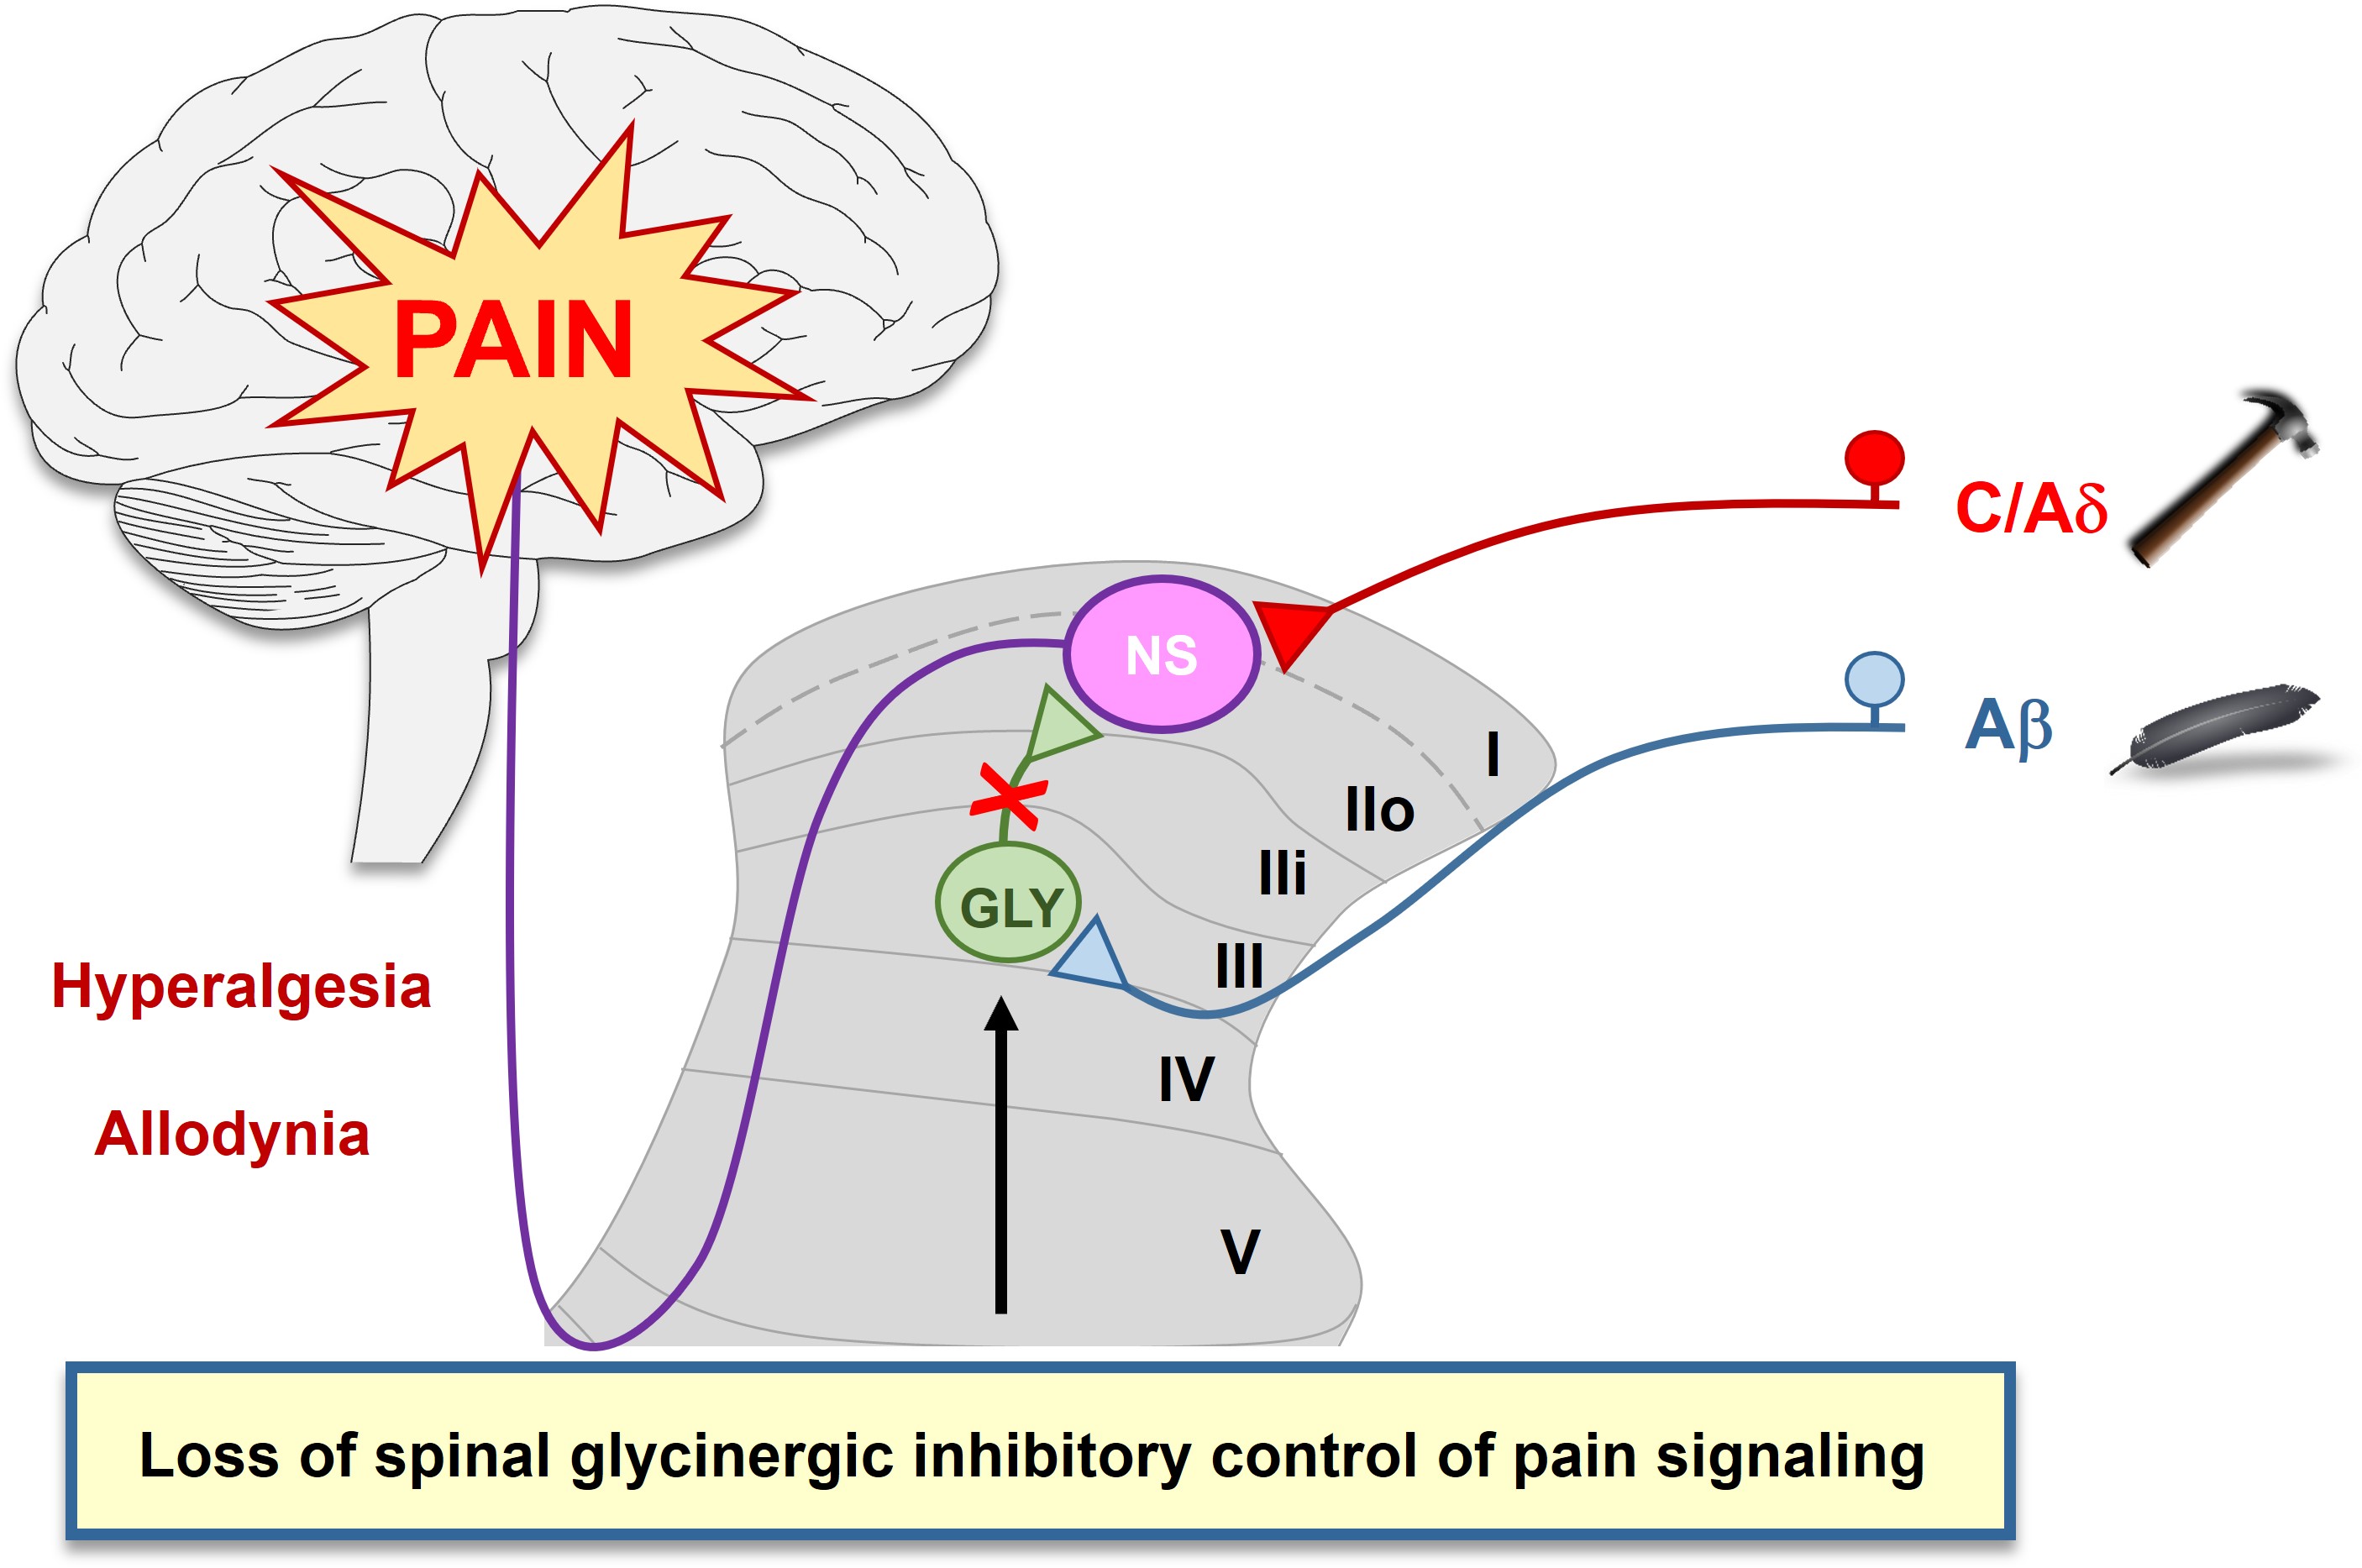 Dysinhibition of Spinal Glycinergic Signaling